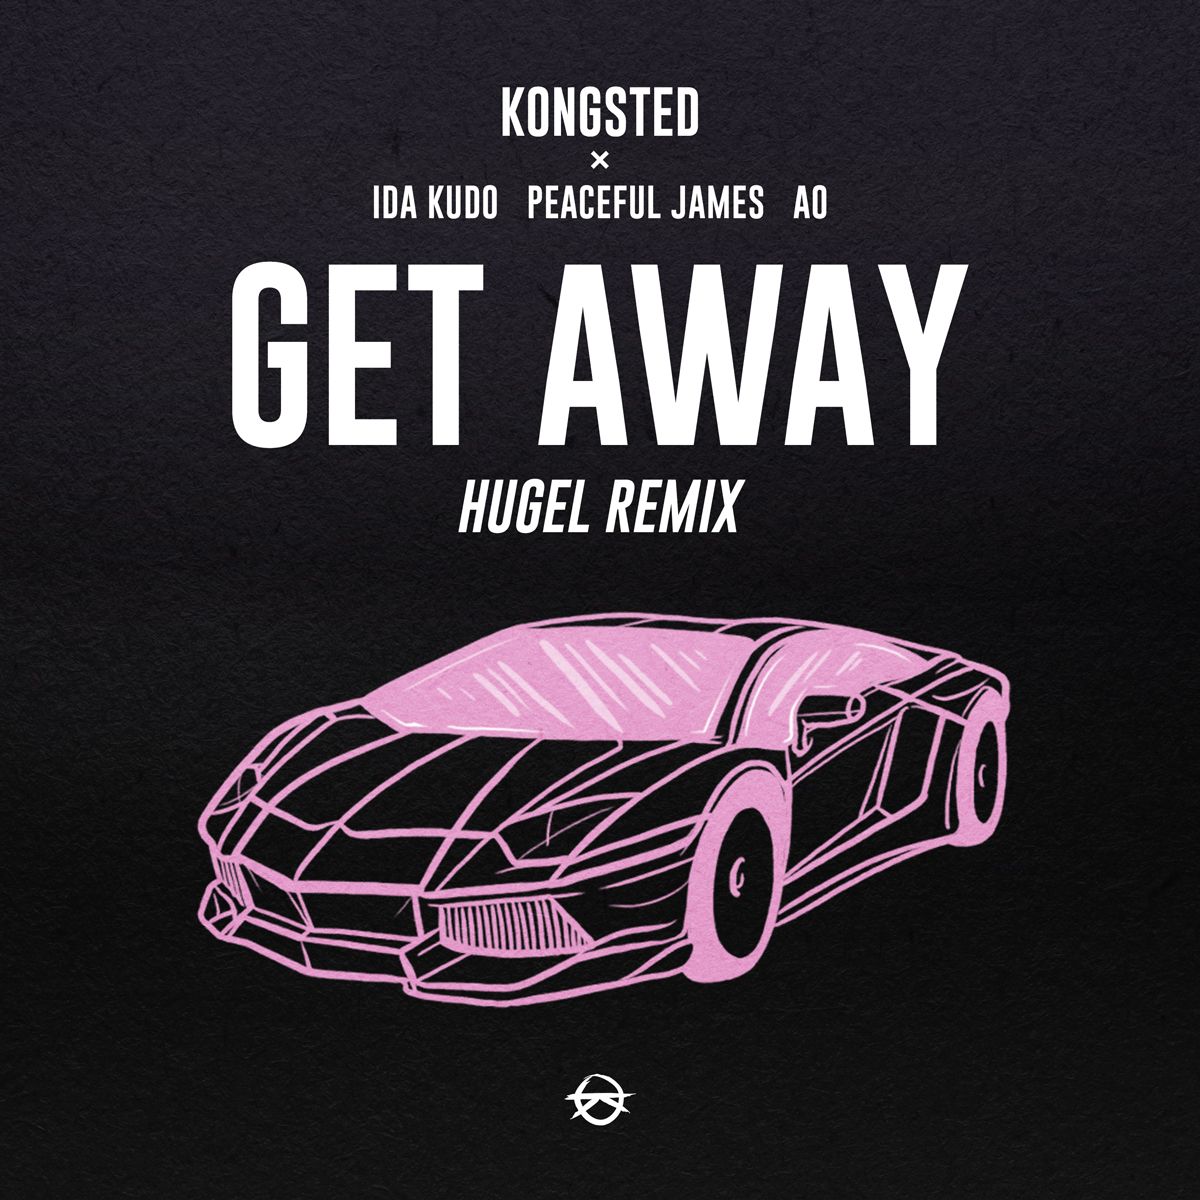 kongsted_getaway_remix_cover_final_some.jpg